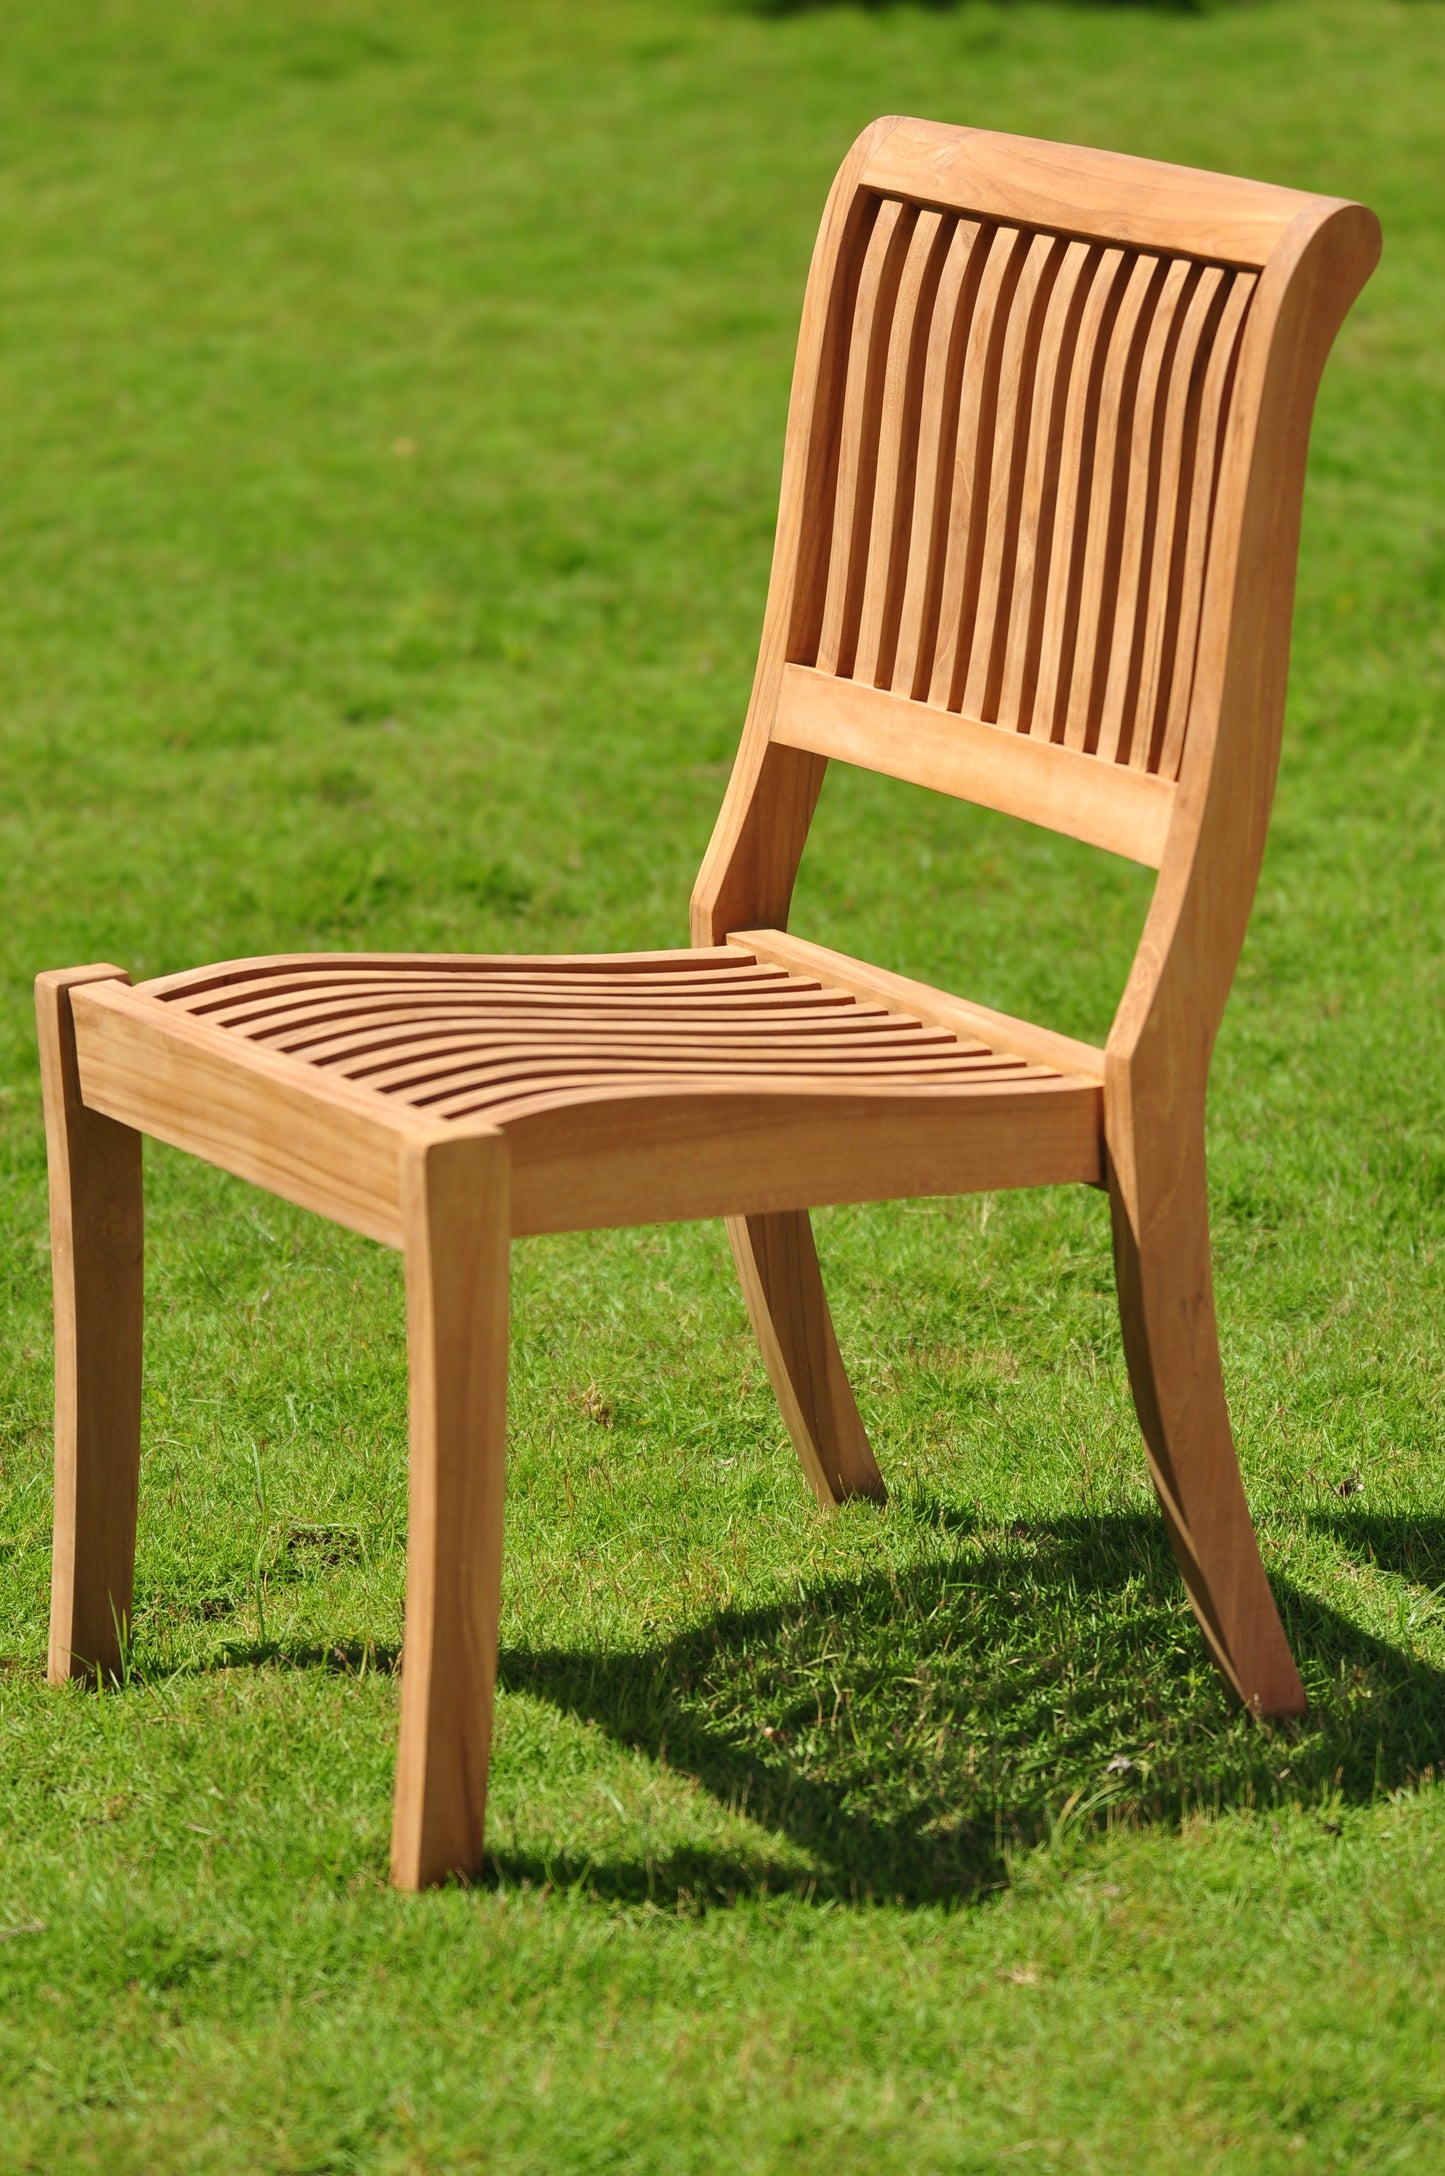 Arbor Stacking Armless Dining Chair